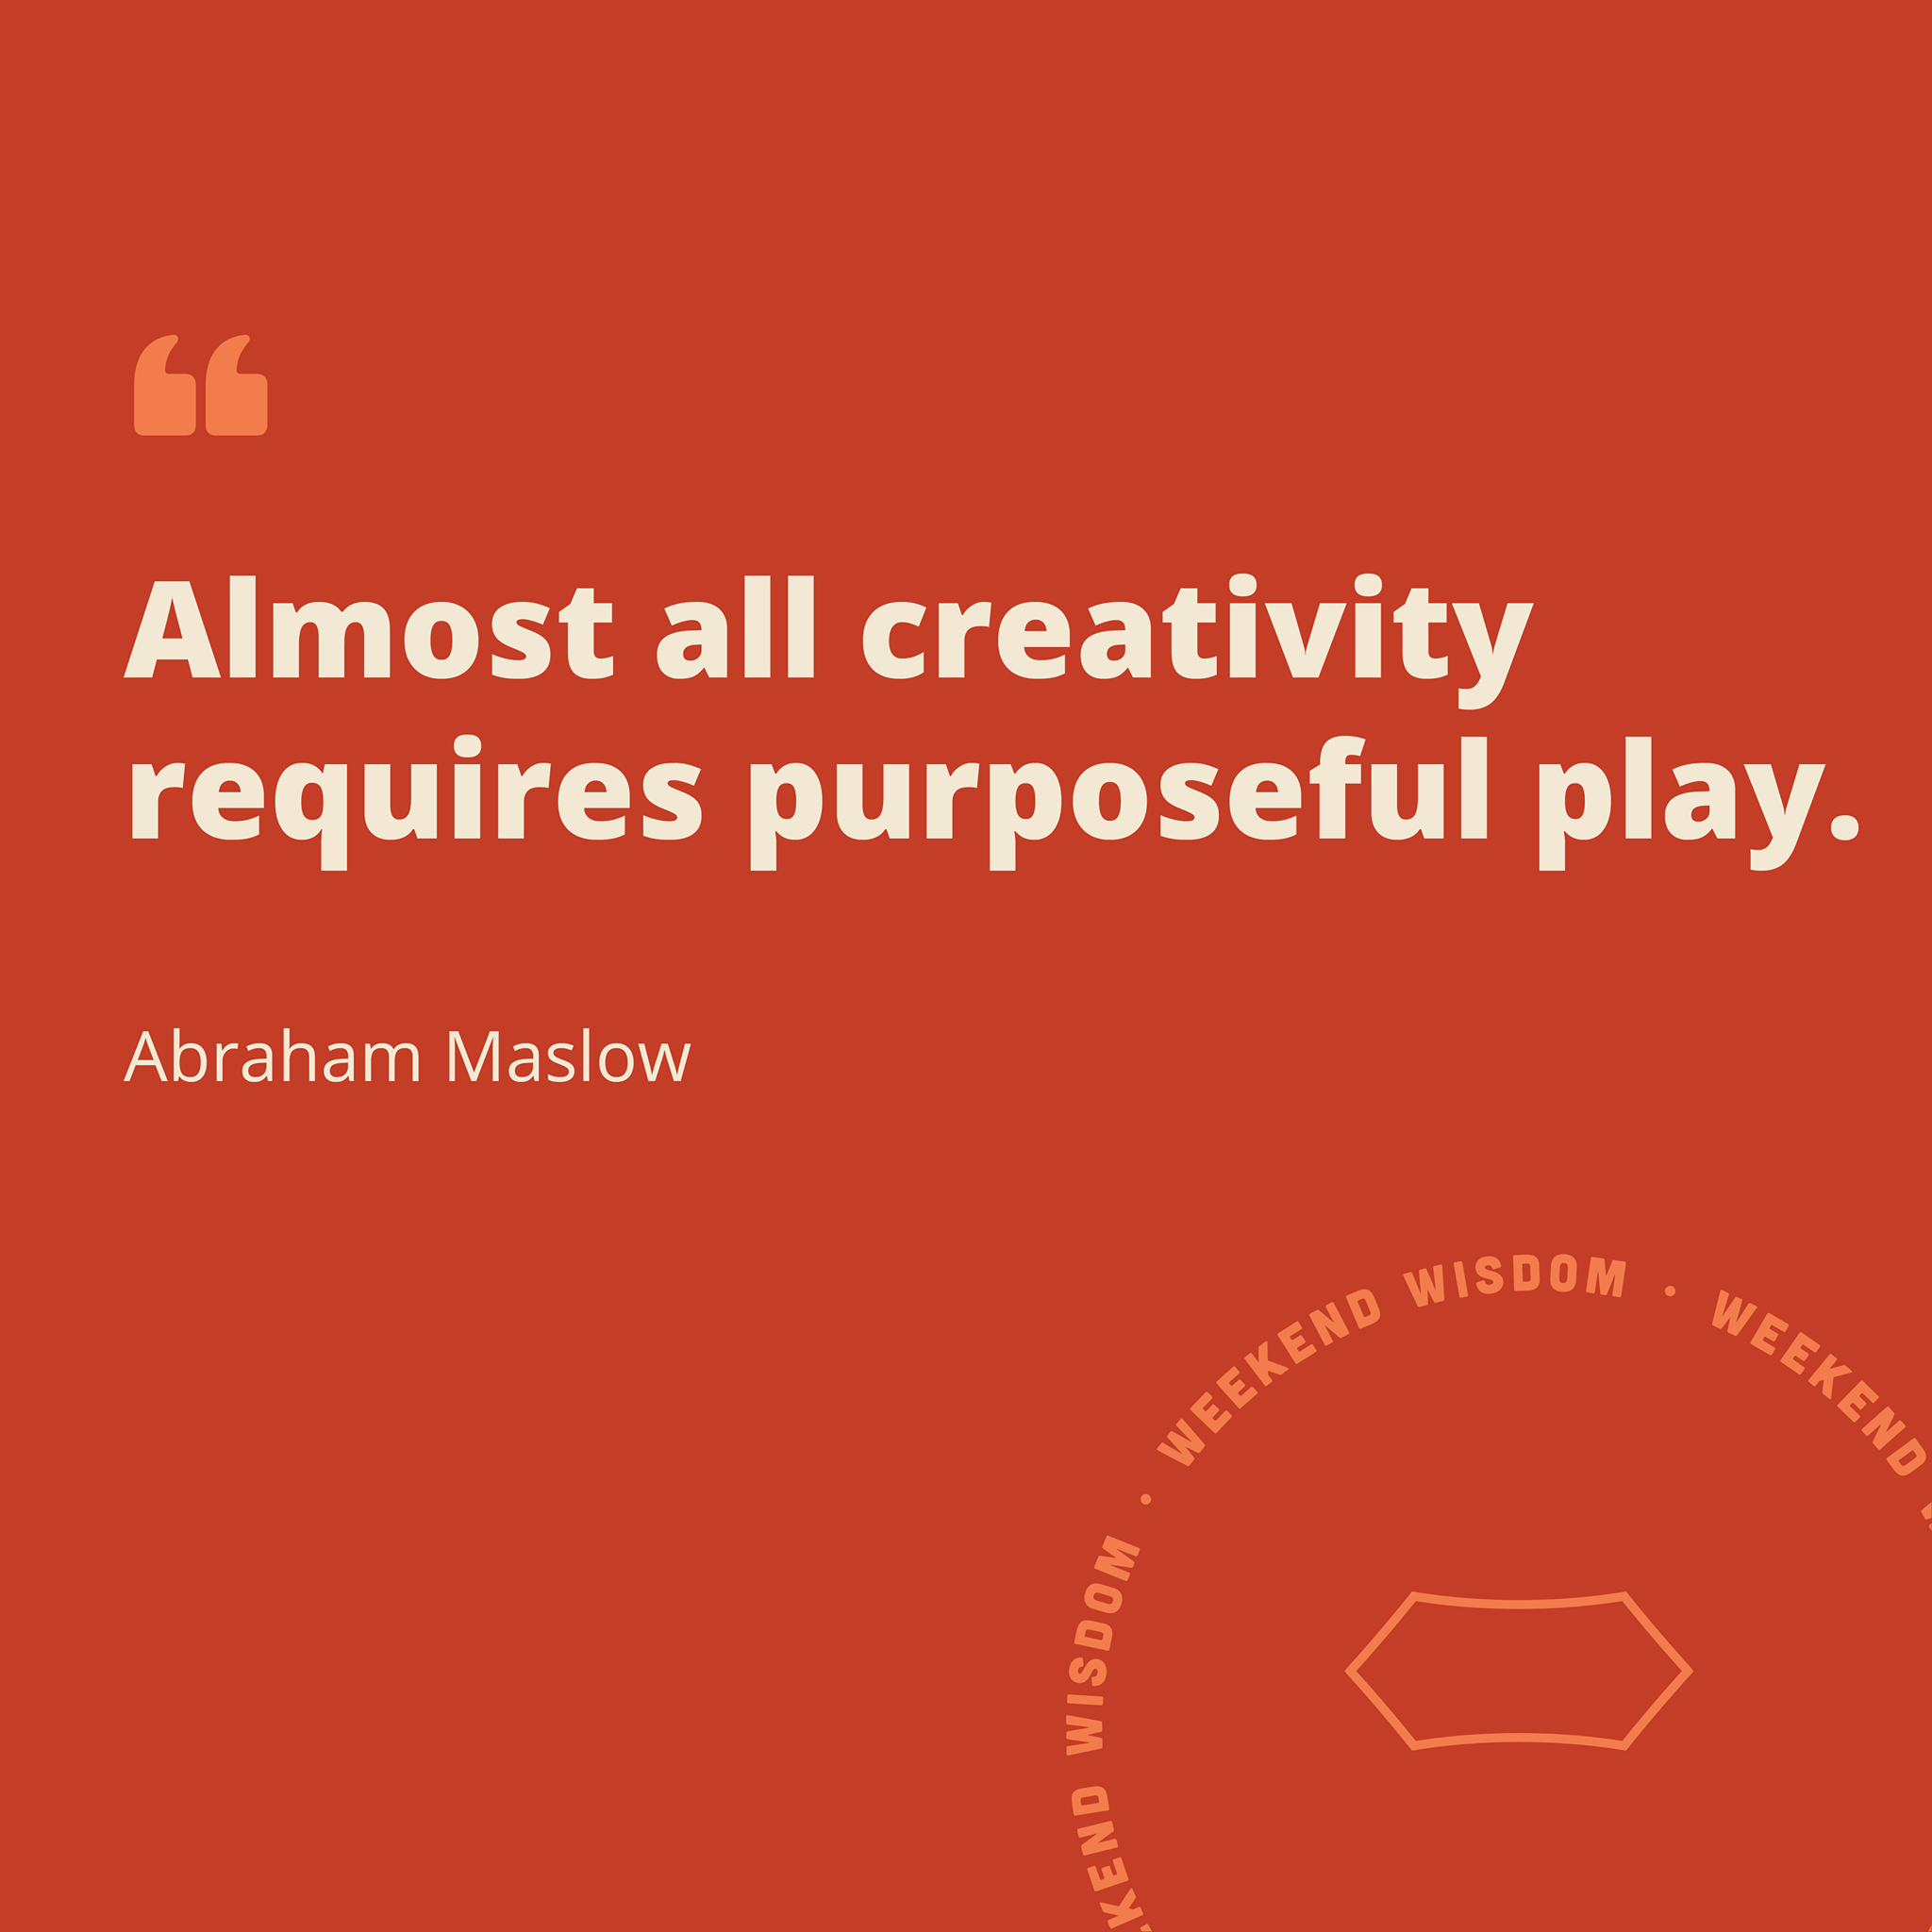 Somehow, purposeful play sounds like a lot more work than being creative